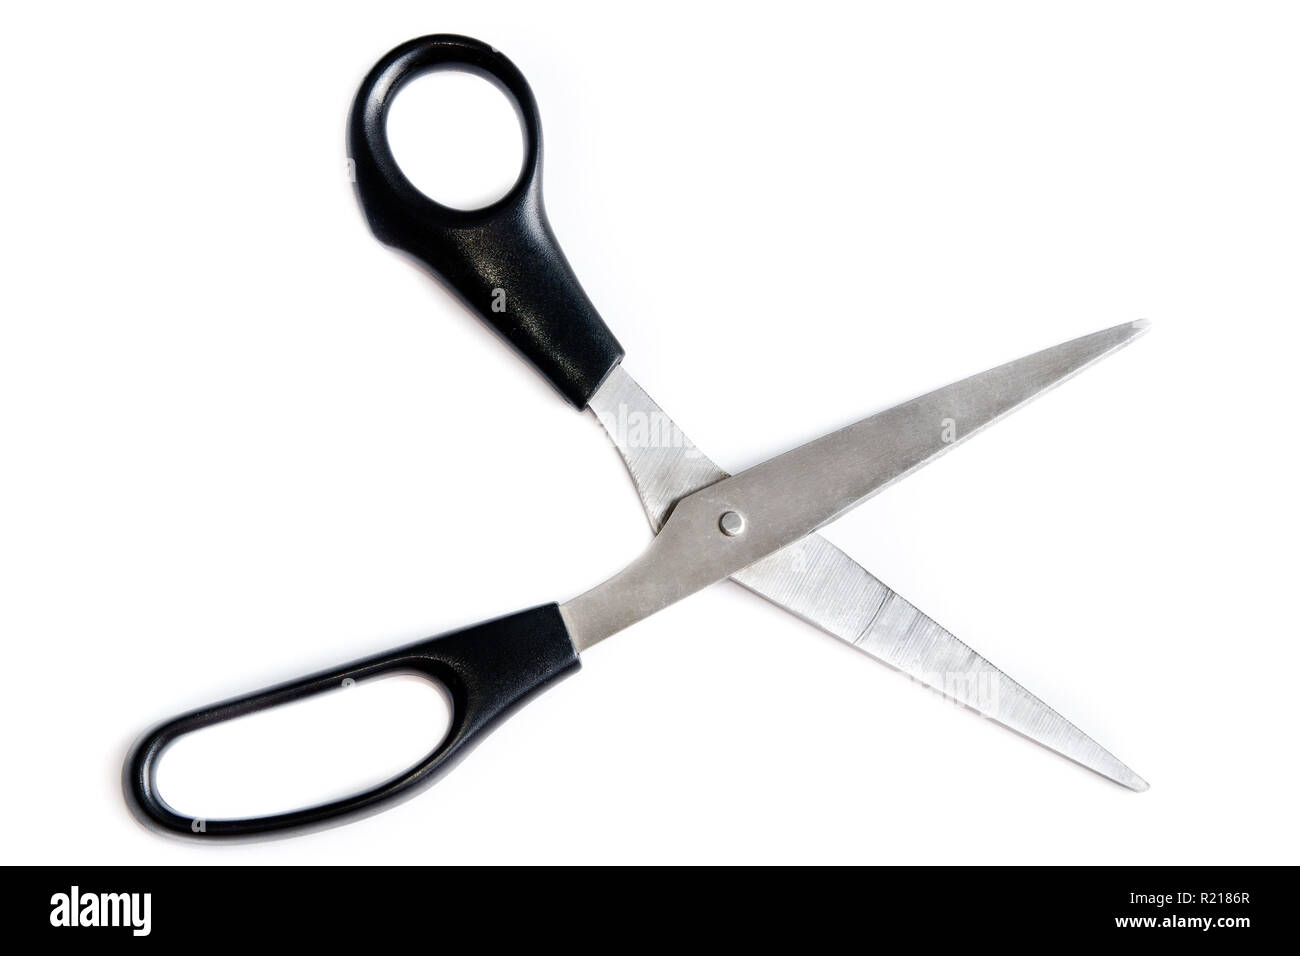 scissors isolated on a white background Stock Photo